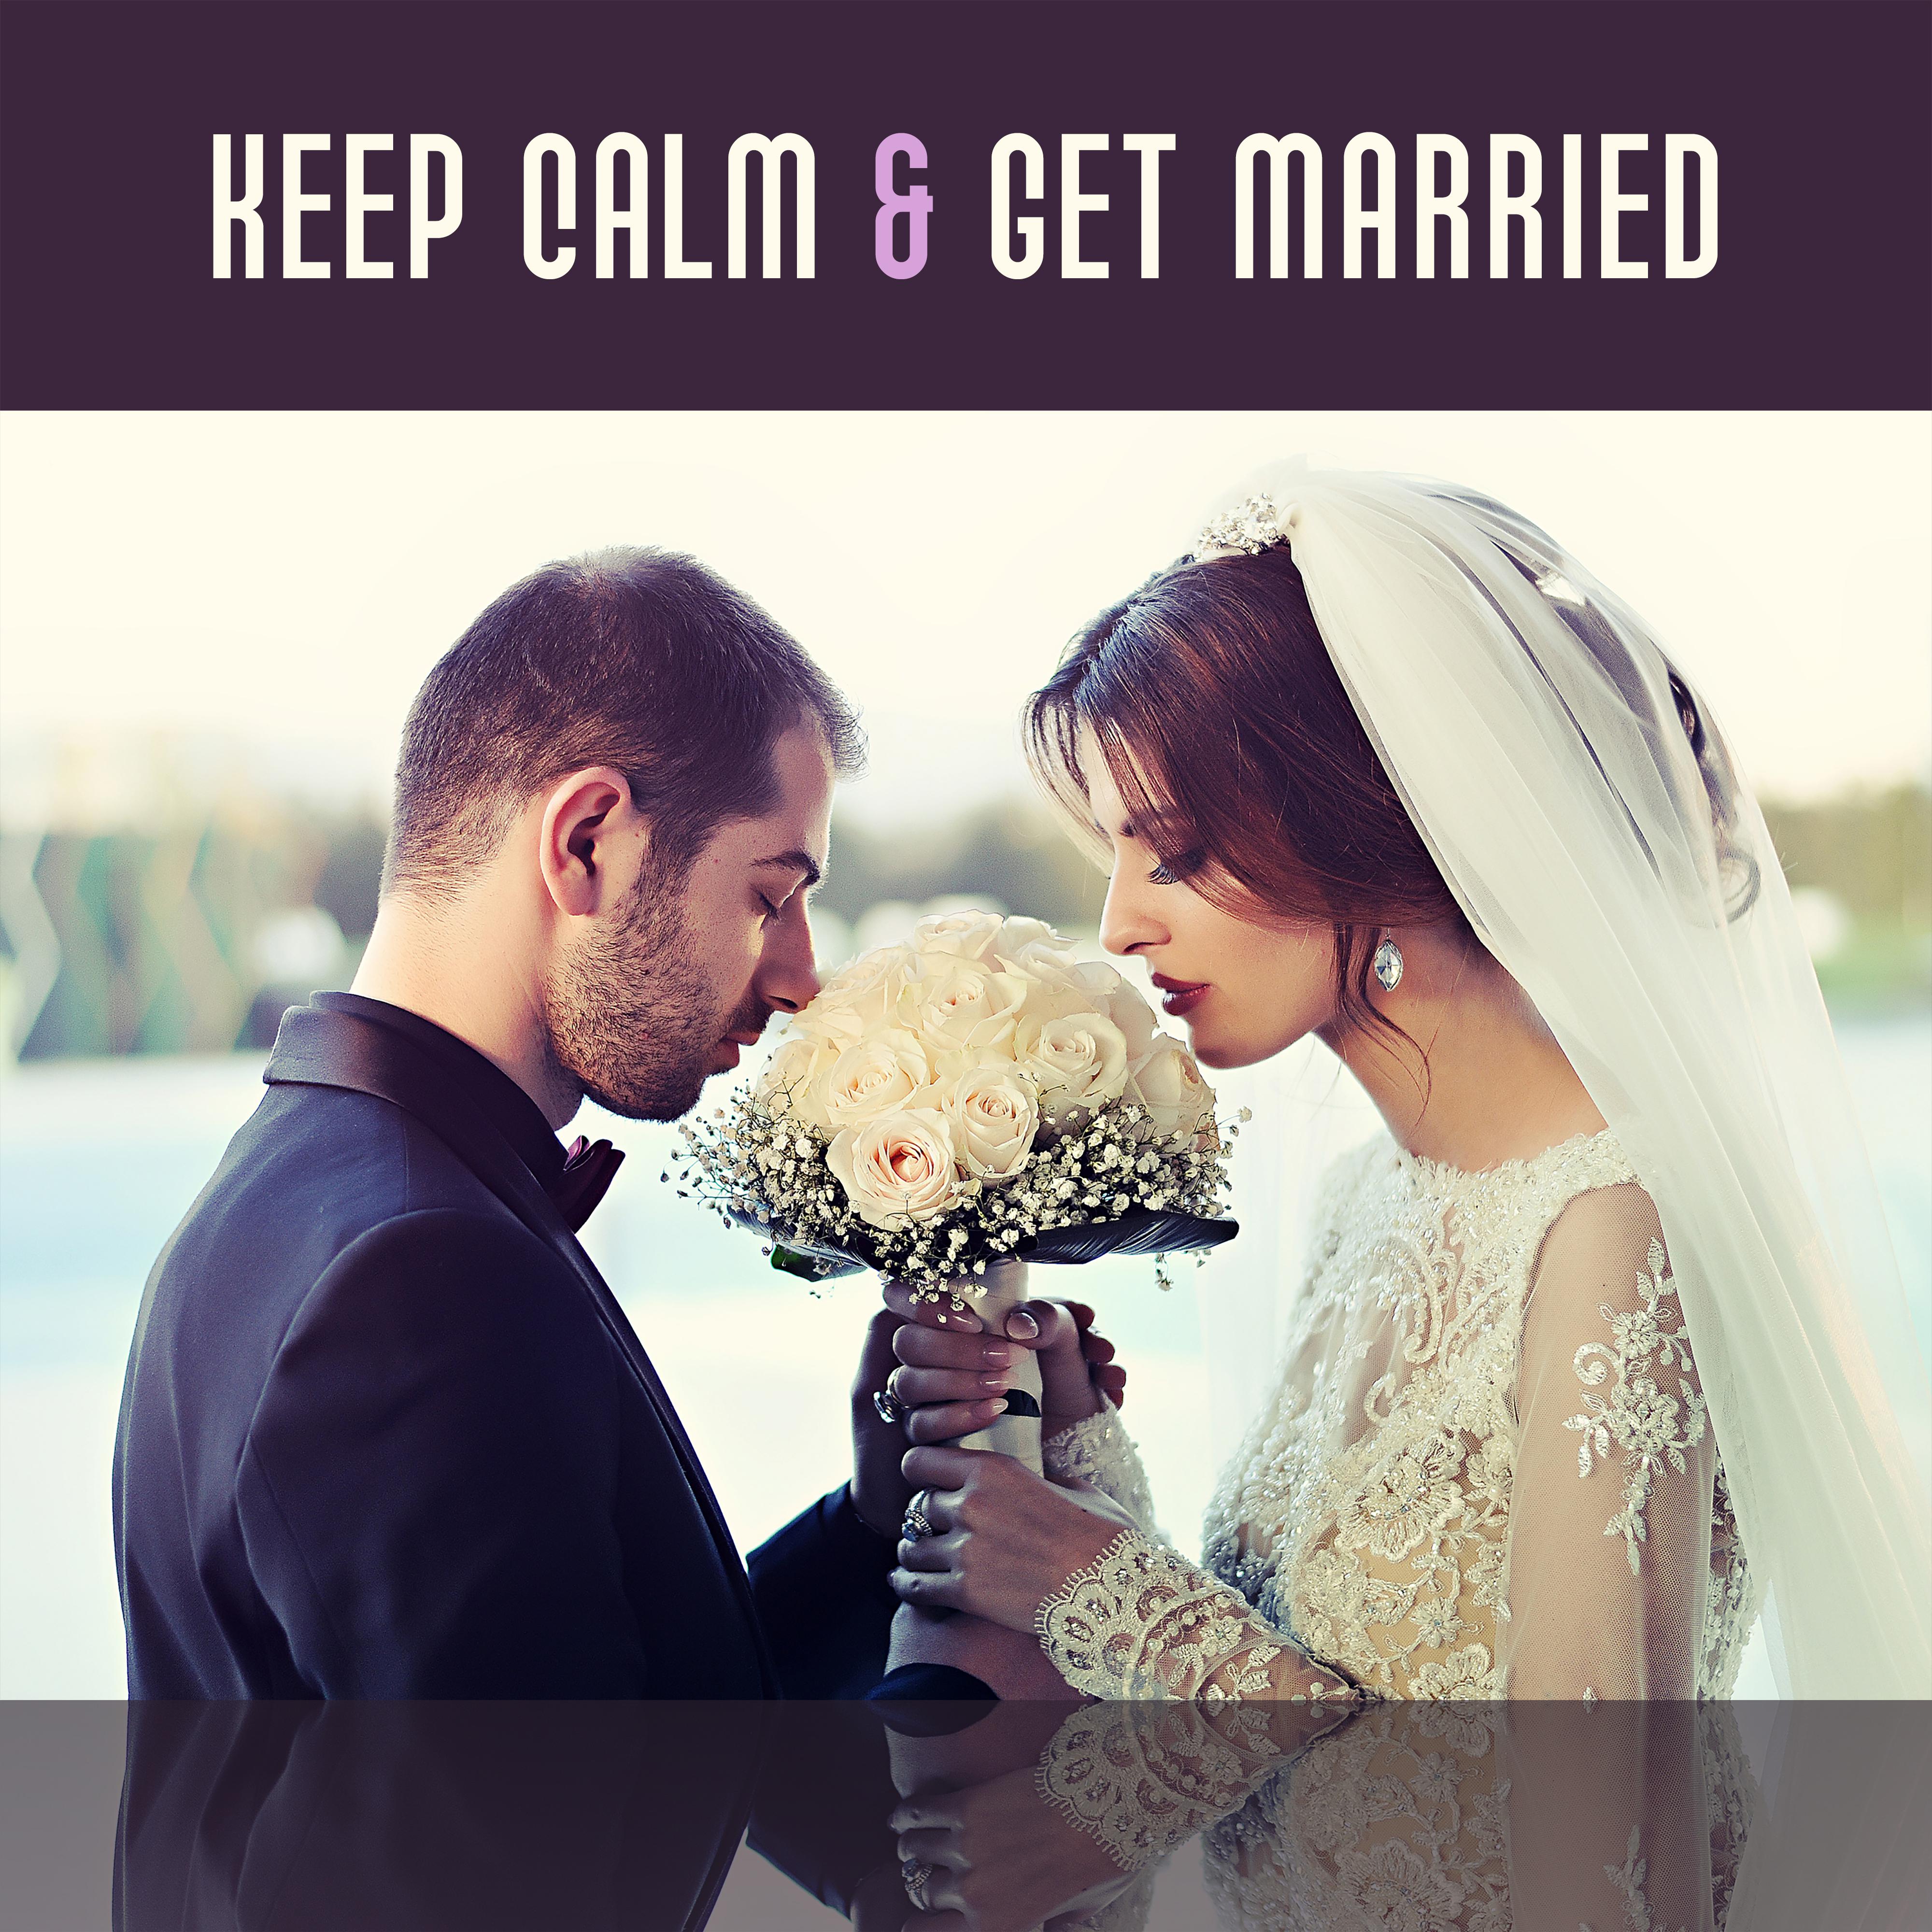 Keep Calm  Get Married  Wedding Ceremony Songs, Background Music for Wedding, Smooth Jazz for Wedding Dinner, Mellow Guitar  Sax Sounds of Jazz, Ambient Jazz Lounge